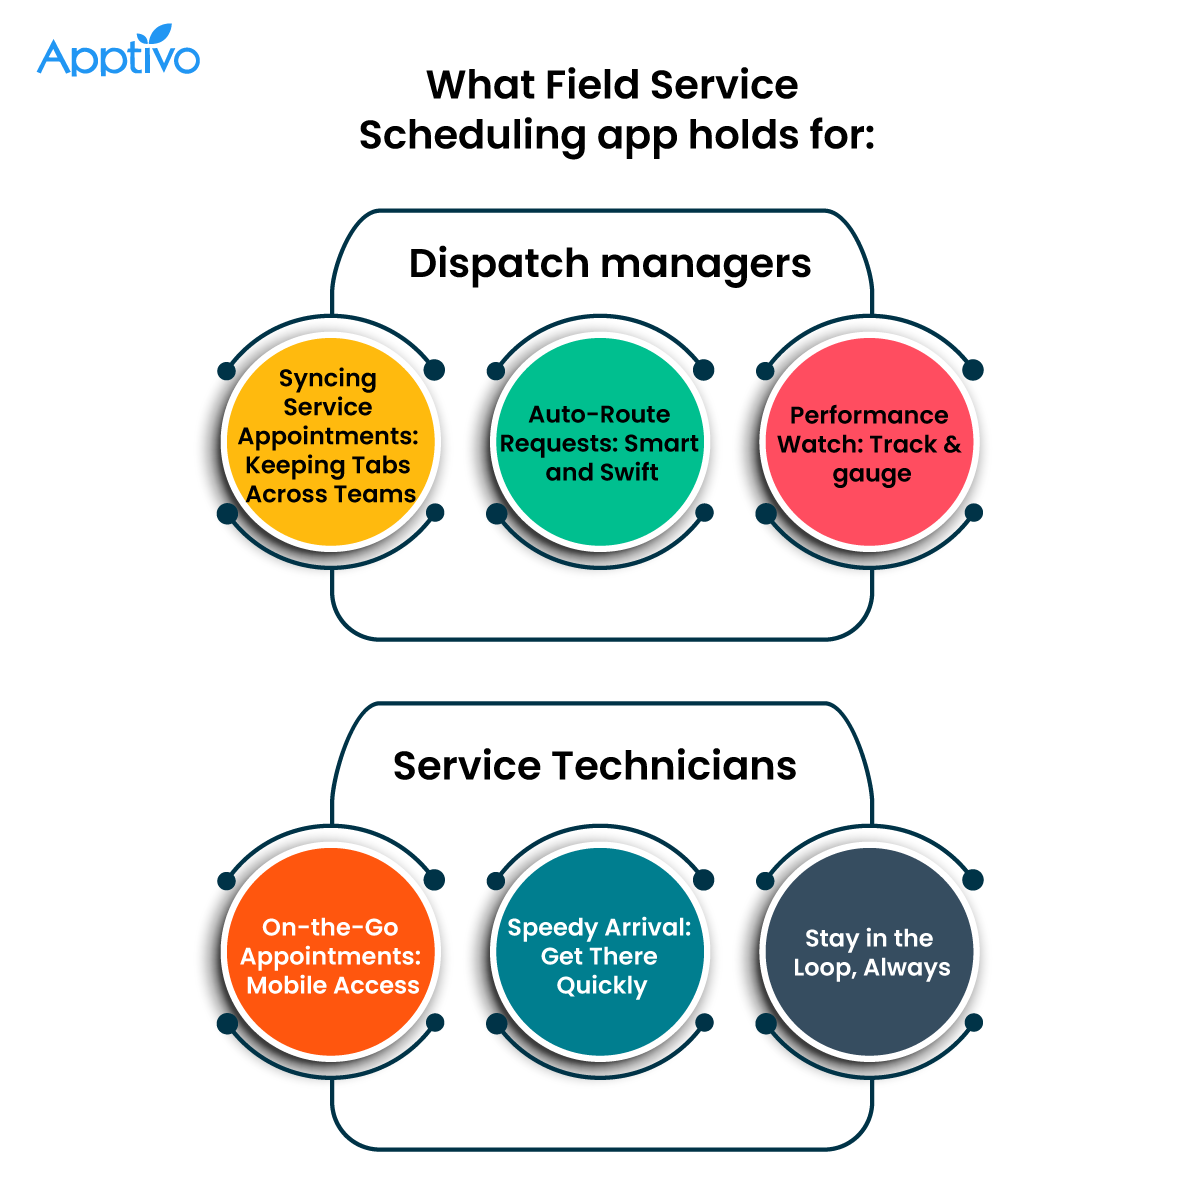  Benefits of a Field Service Scheduling App
